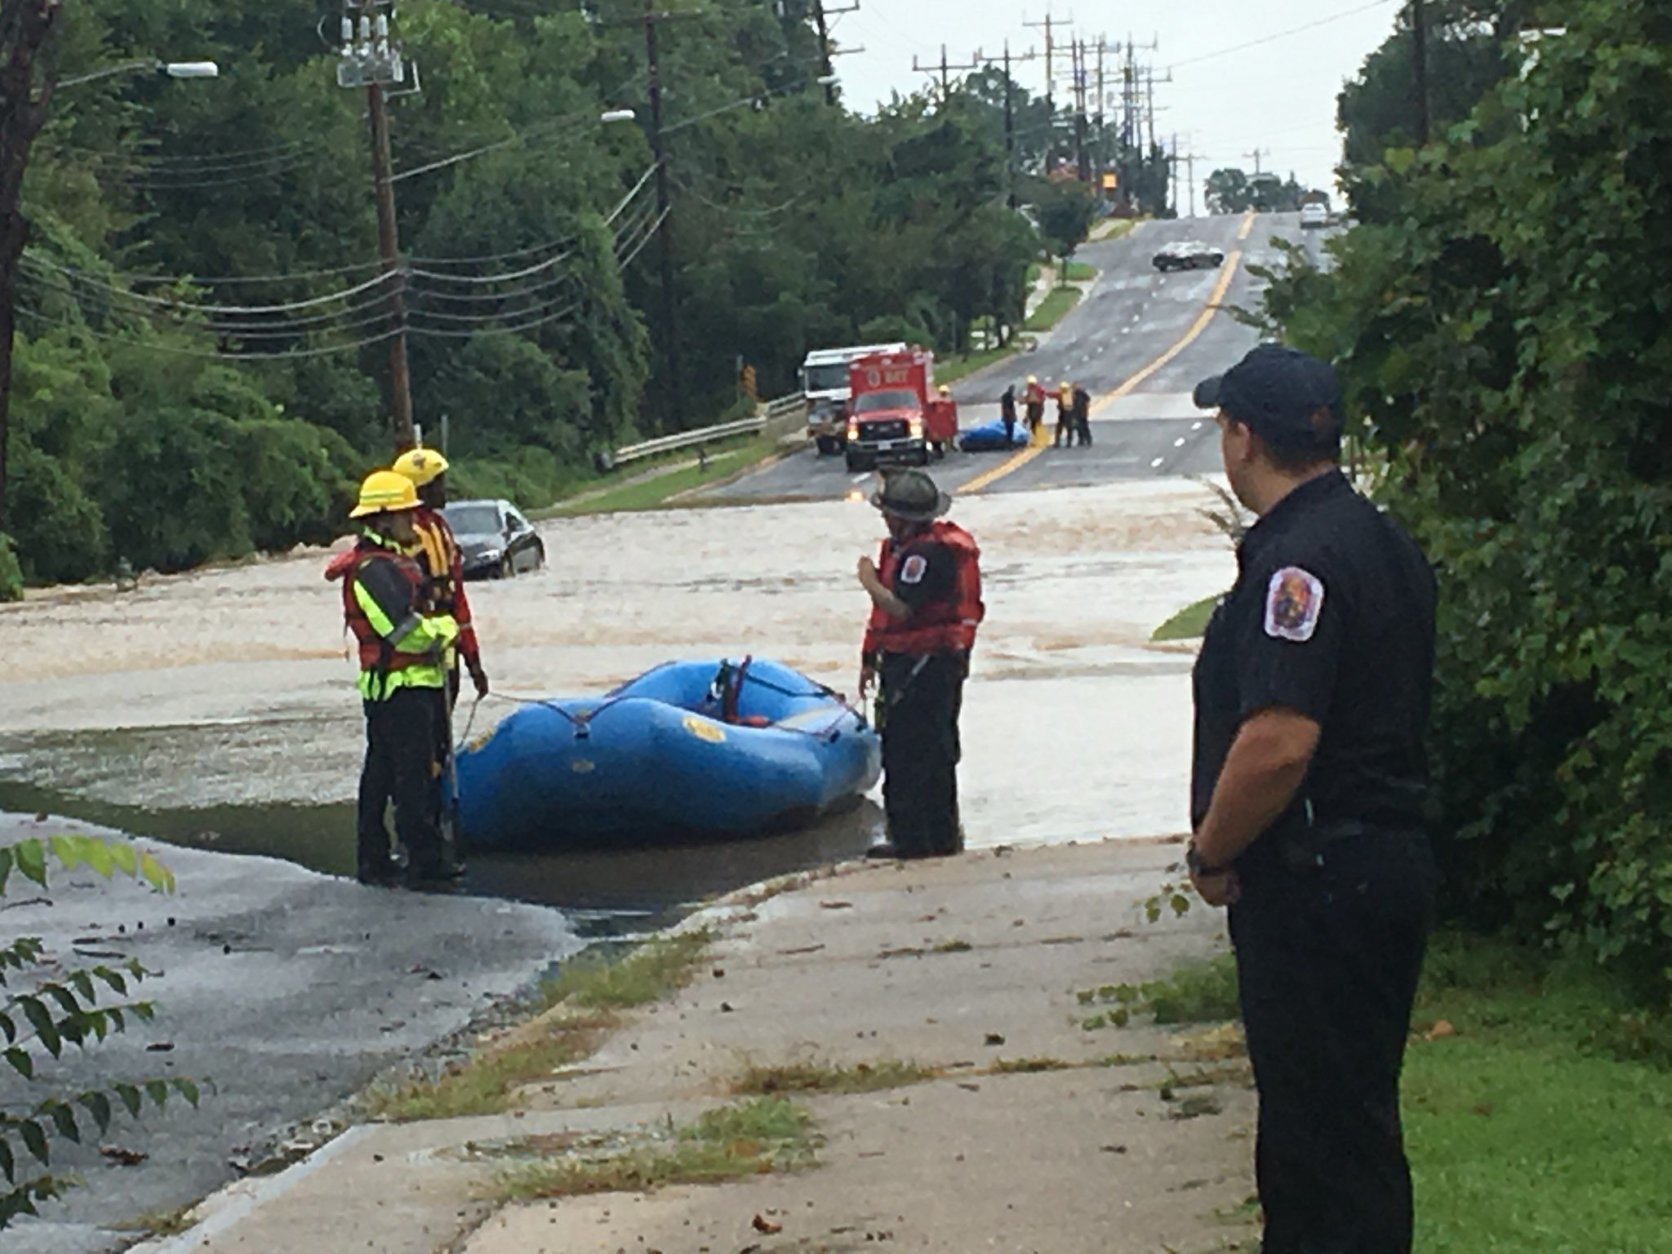 High water trapped several people in a Prince George's County business Tuesday afternoon, requiring the county Fire Department to go into rescue mode. (Courtesy Prince George's County Office of Emergency Management)